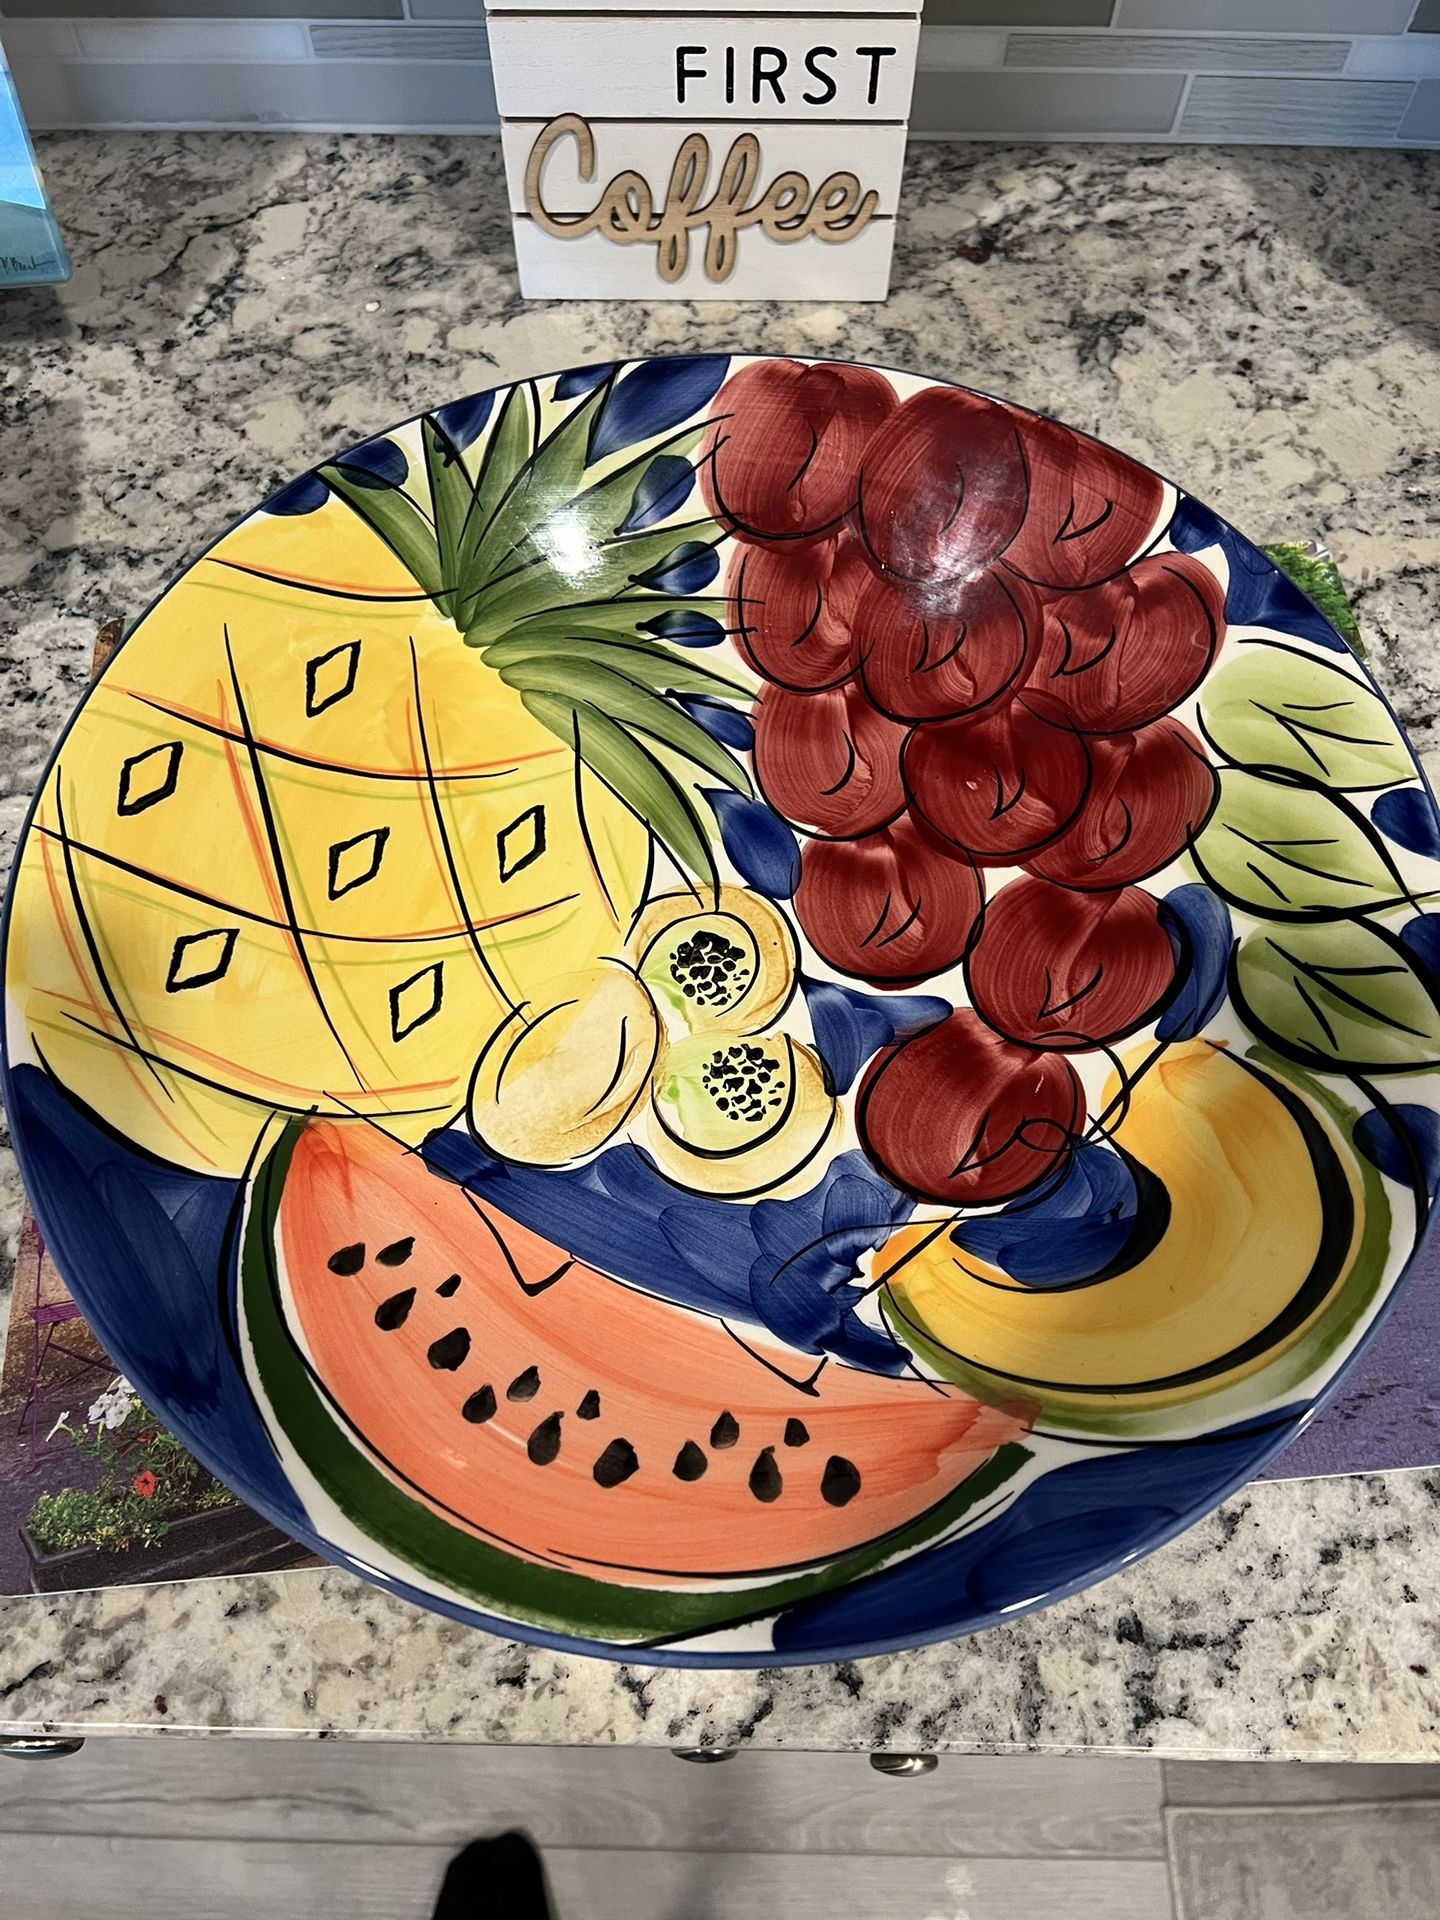 Fruit Bowl Made In Italy 